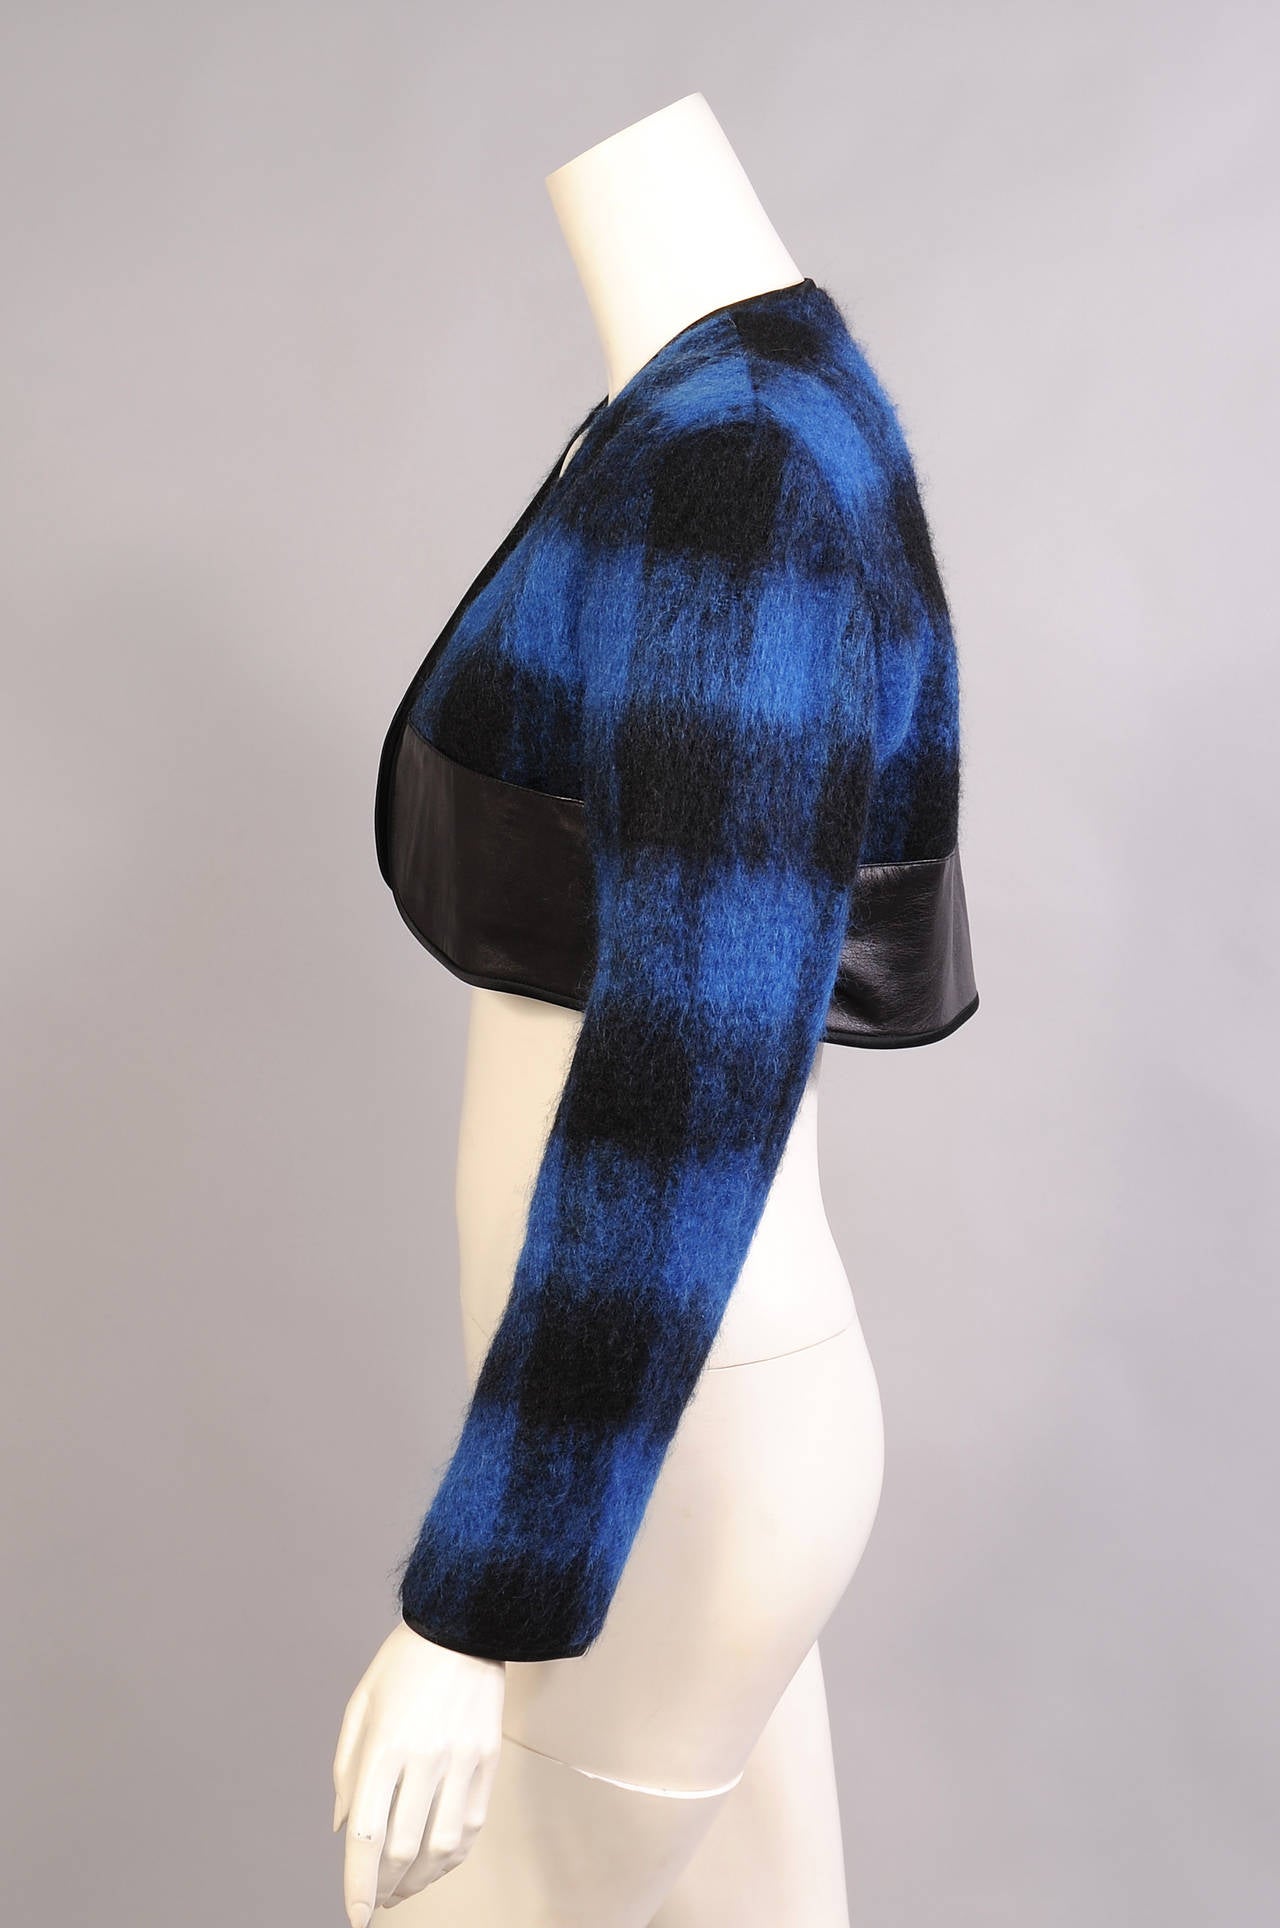 A bold black and blue mohair and wool plaid bolero has a wide band of black leather at the bottom. The jacket and cuffs are trimmed with black satin. It is fully lined in black silk and marked a size 6. It is in excellent